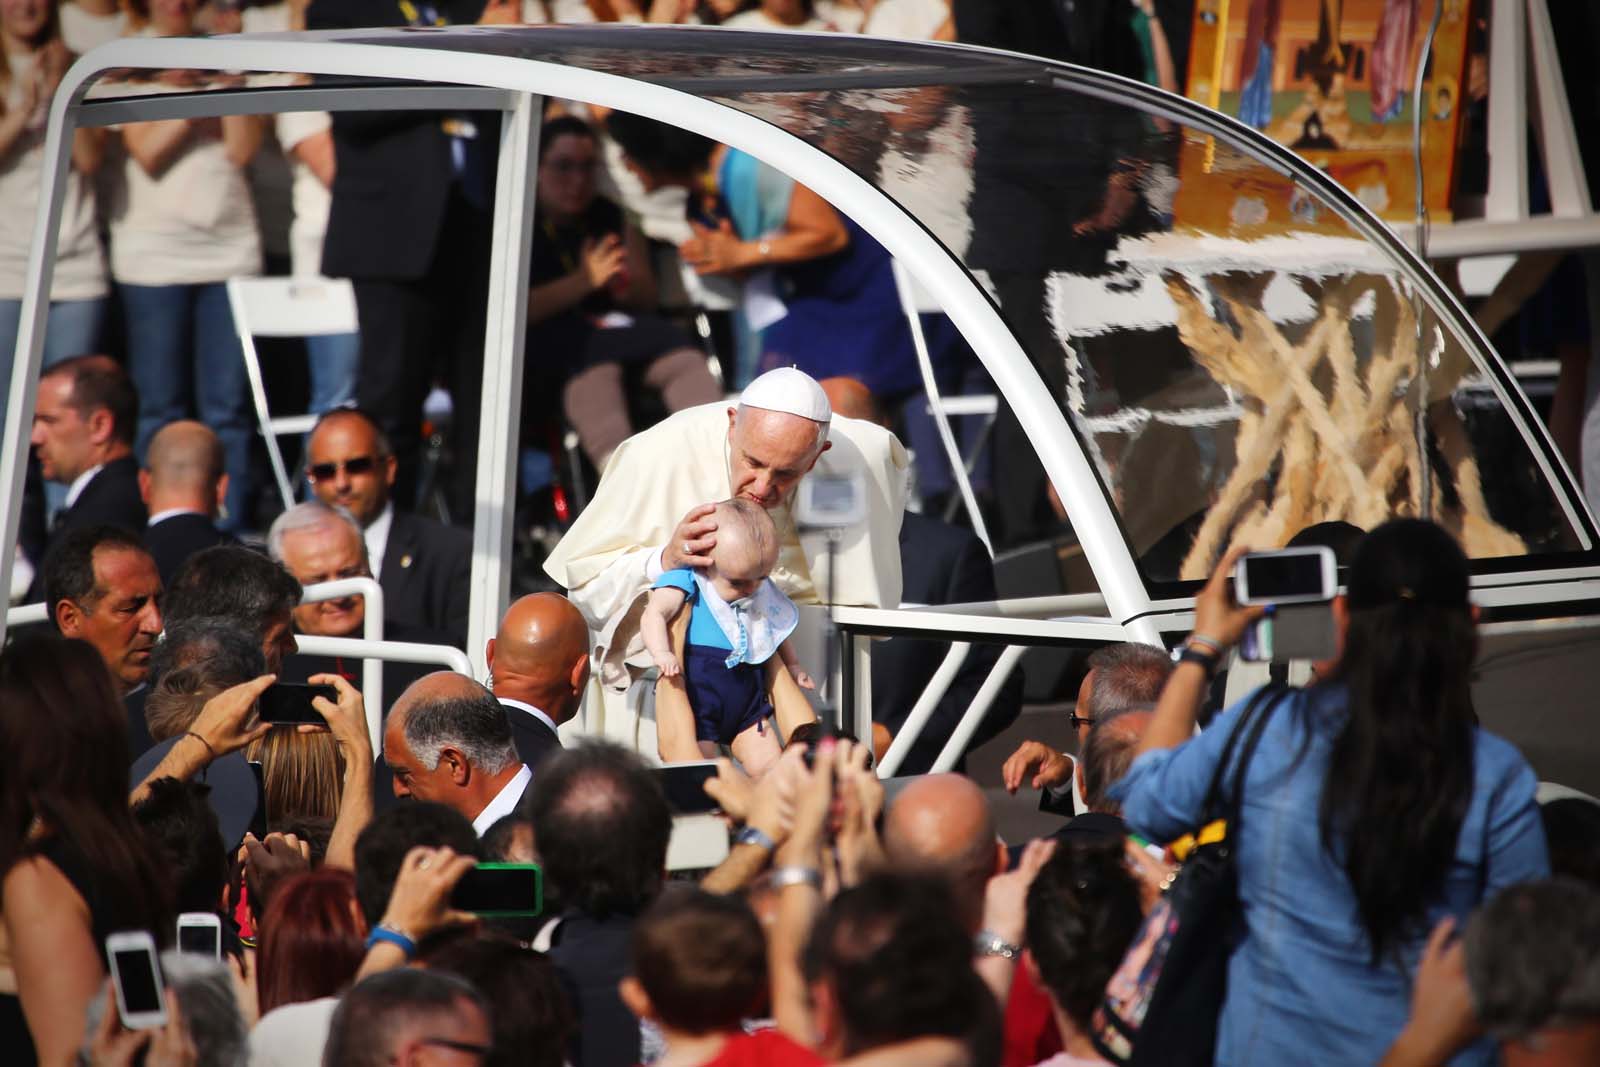 papal audience tours